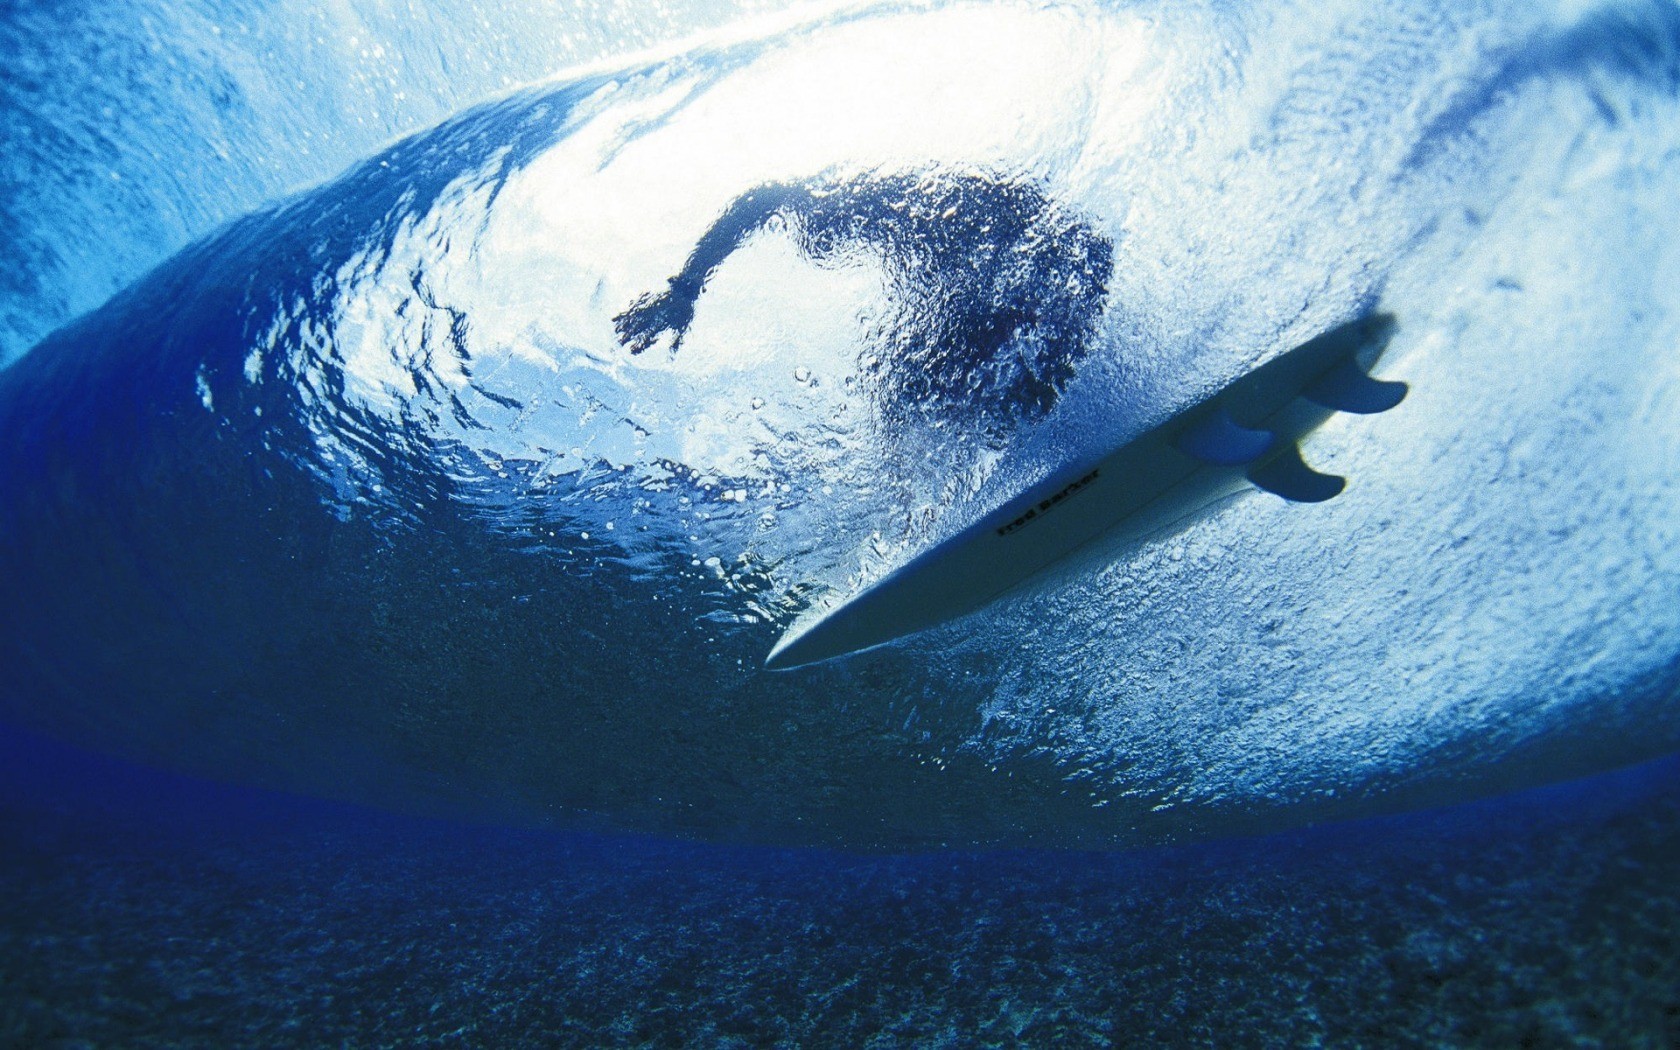 Waves Surfing Wallpaper 1680x1050 Waves Surfing Surfers